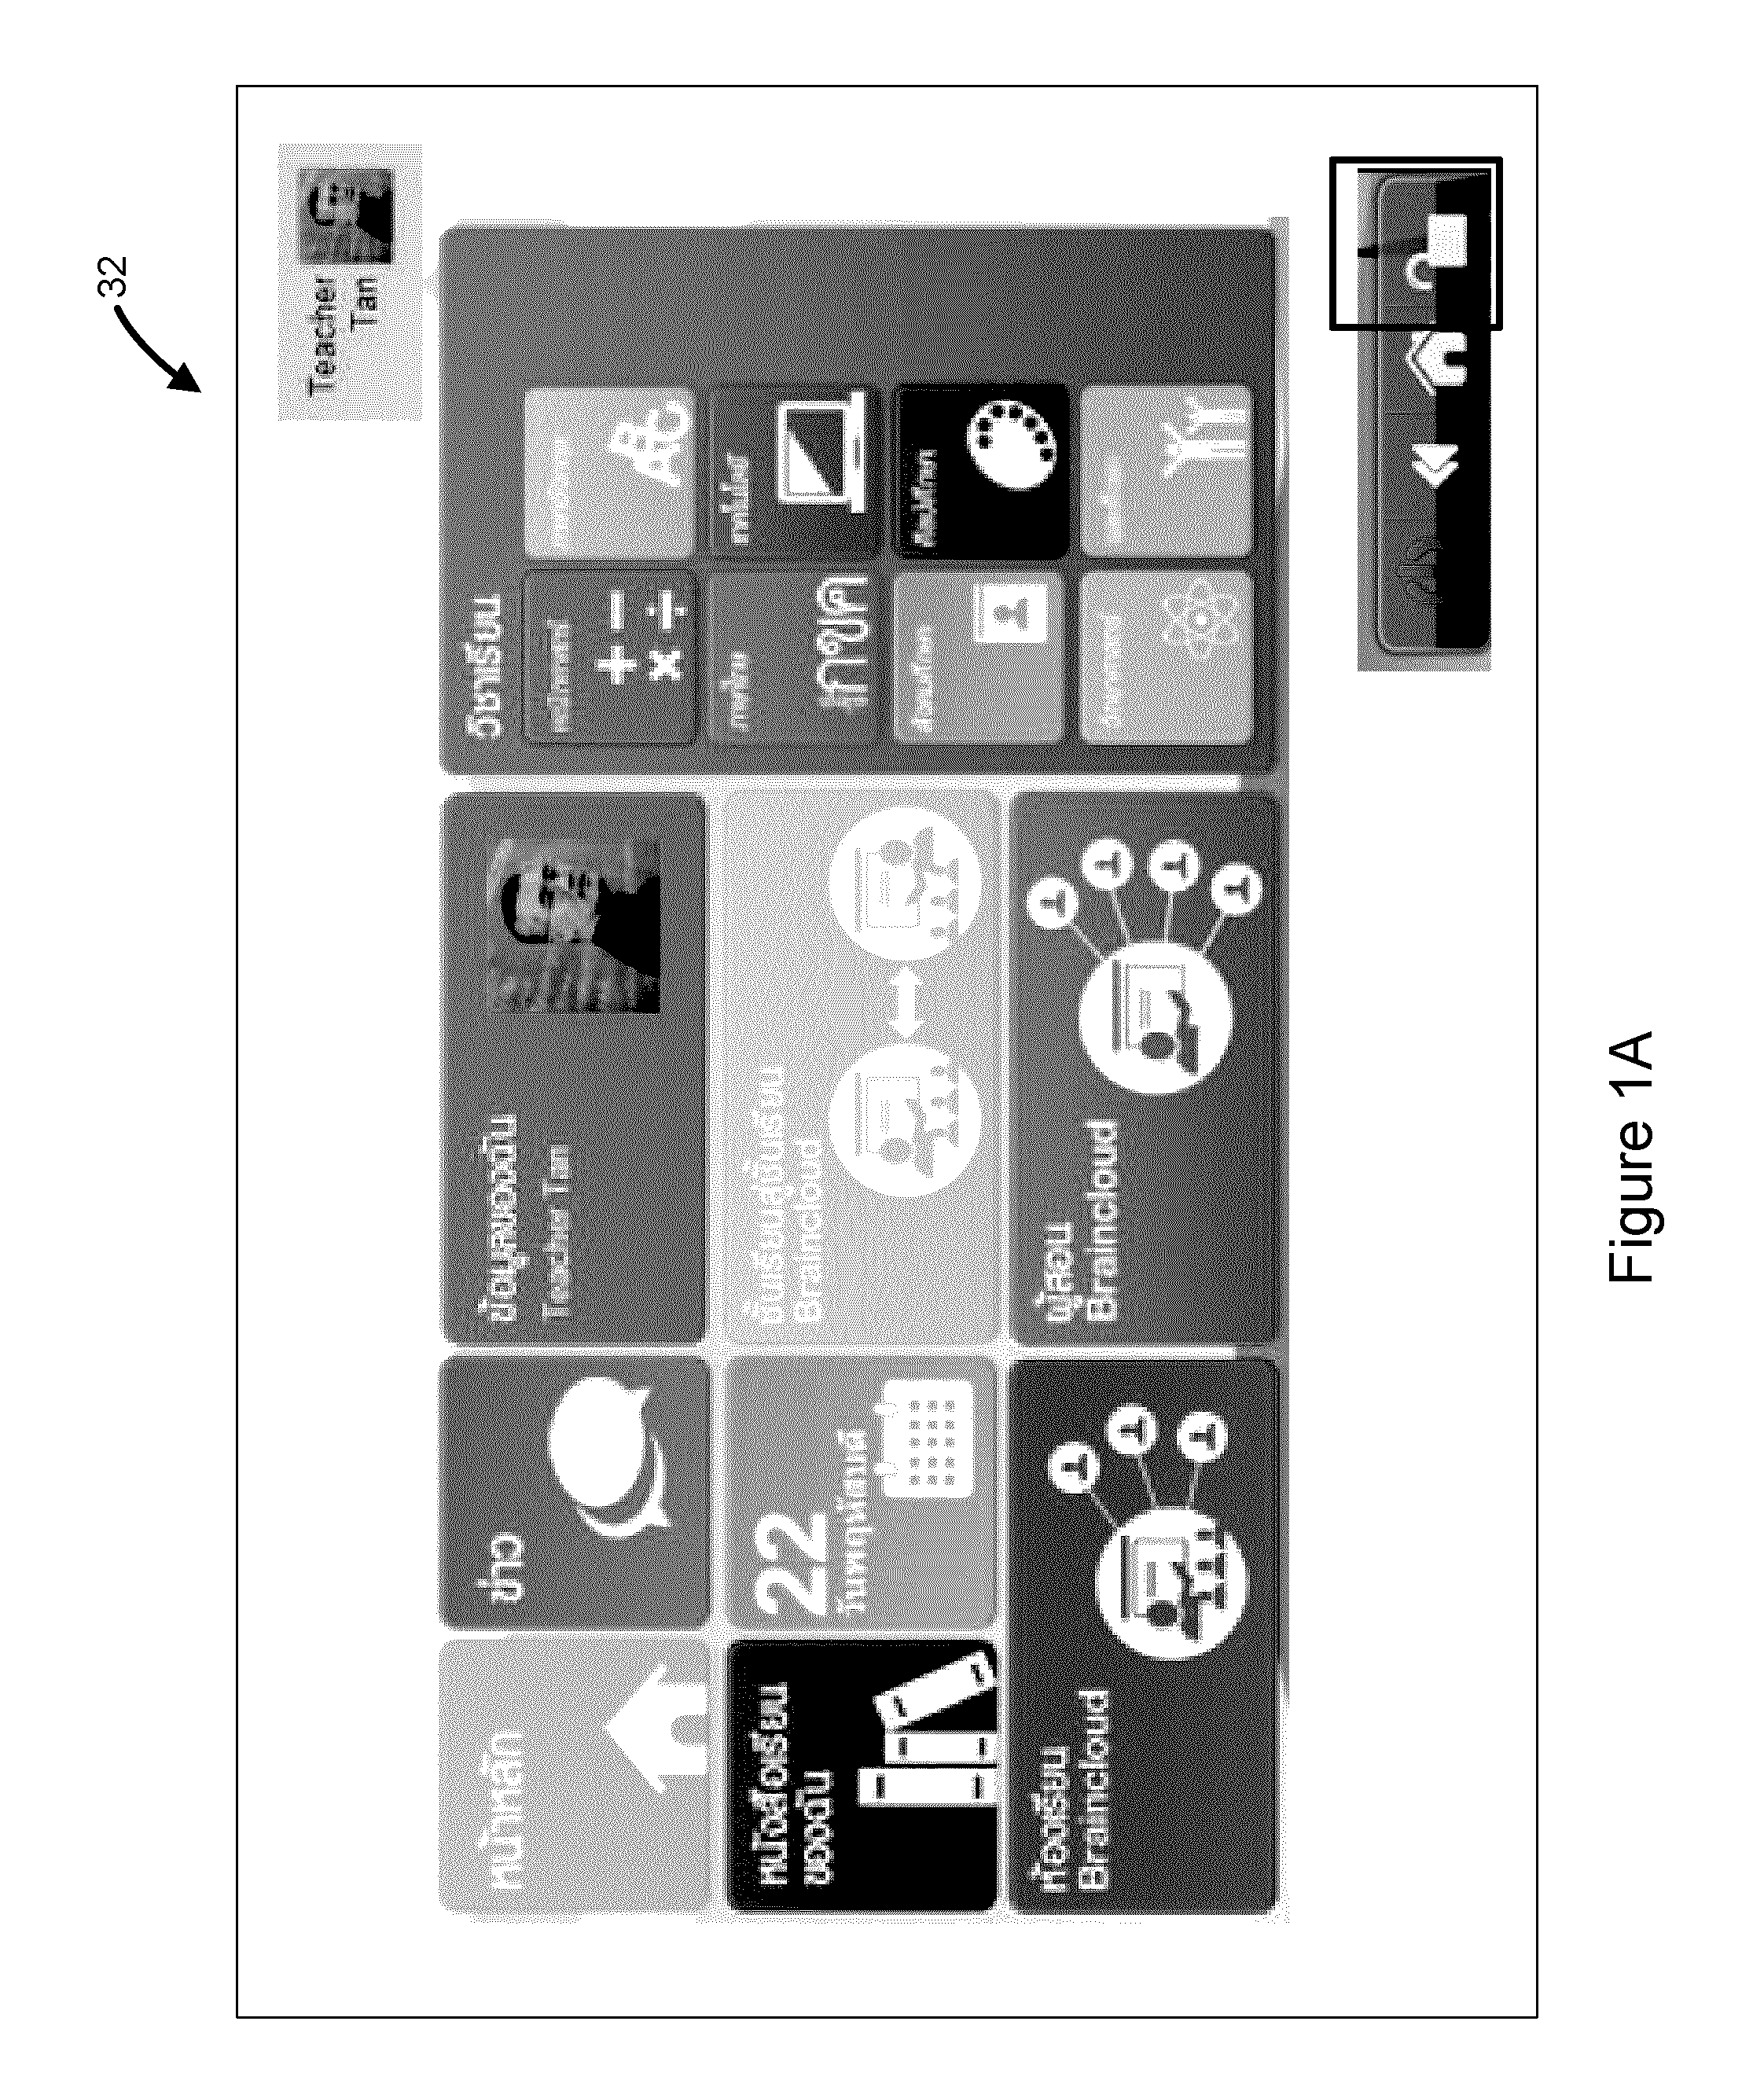 System and method for managing several mobile devices simultaneously